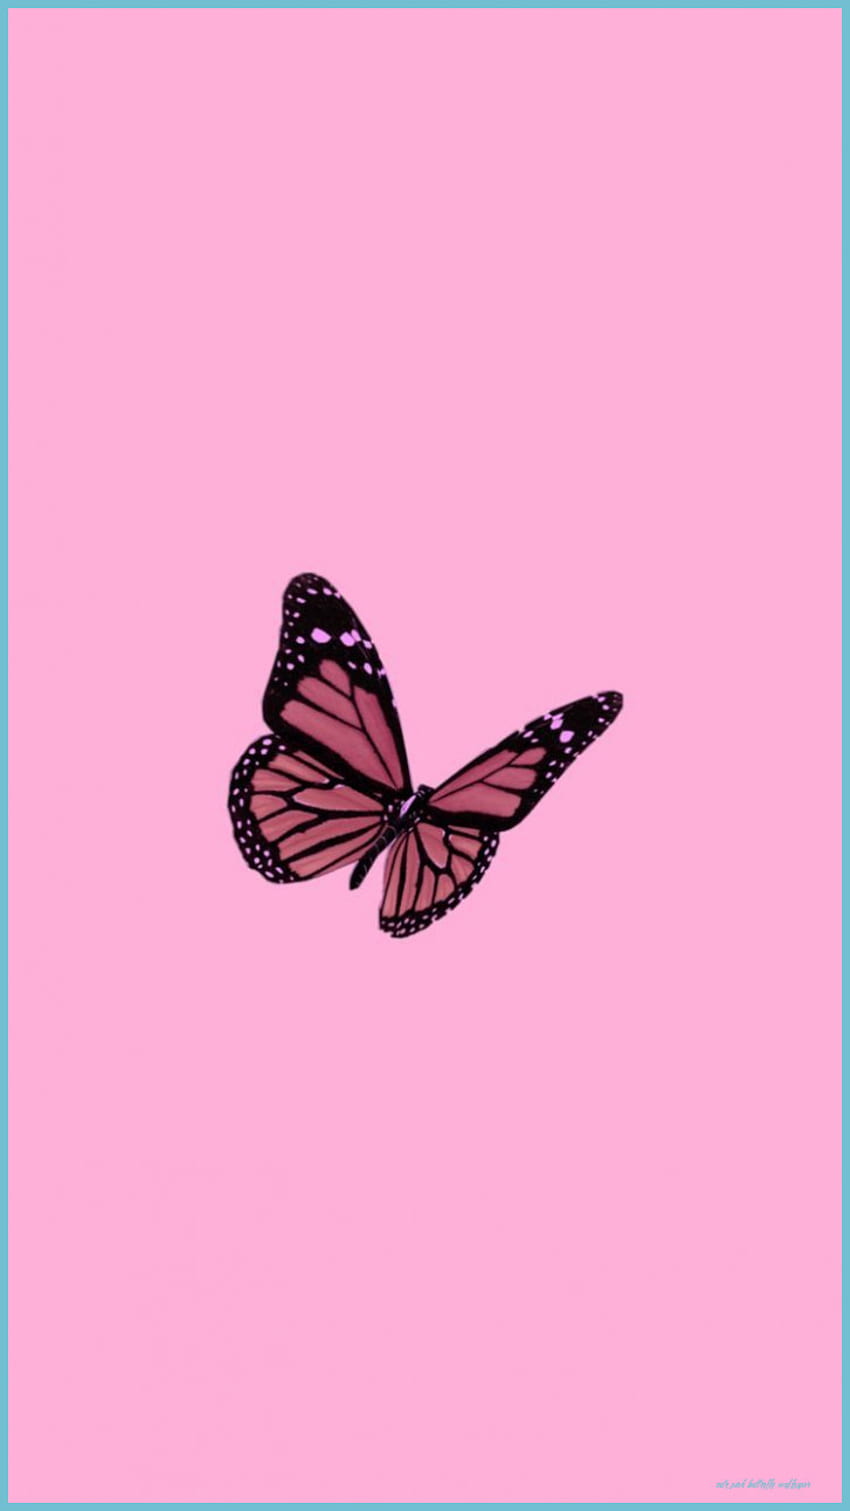 Cute Pink Butterfly - Top Cute Pink Butterfly - Cute Pink Butterfly ...